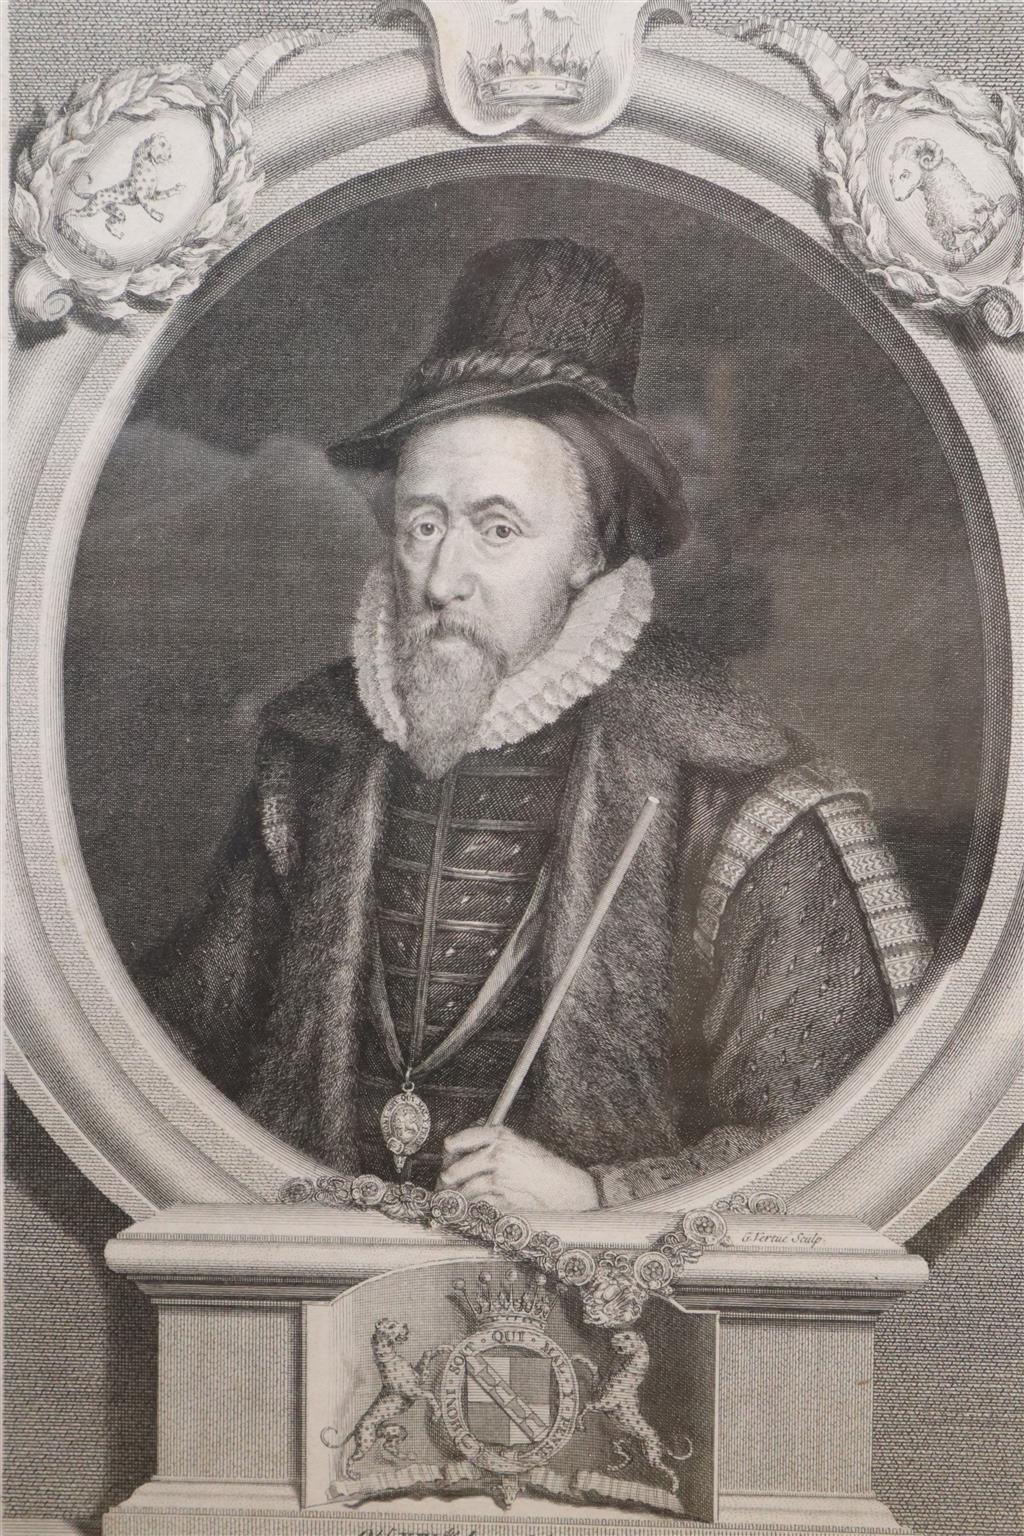 An 18th century engraved portrait of Thomas Sackville, Earl of Dorset, overall 48 x 34cm